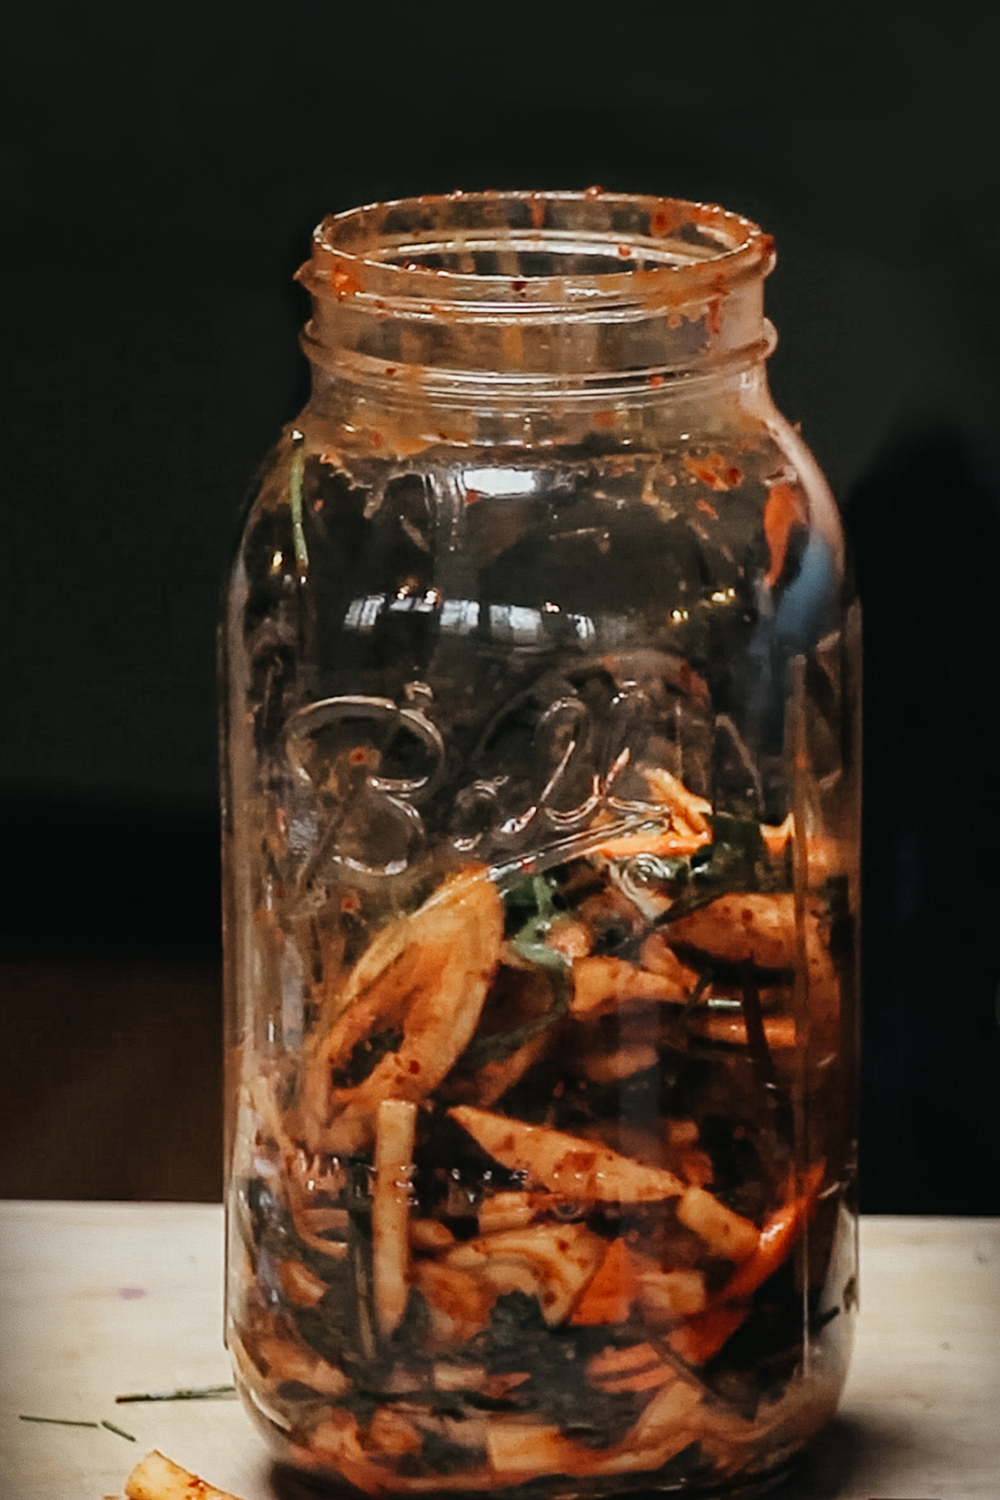 Dandelion Ferment Recipe – The Craft of Herbal Fermentation Course - Herbal Academy